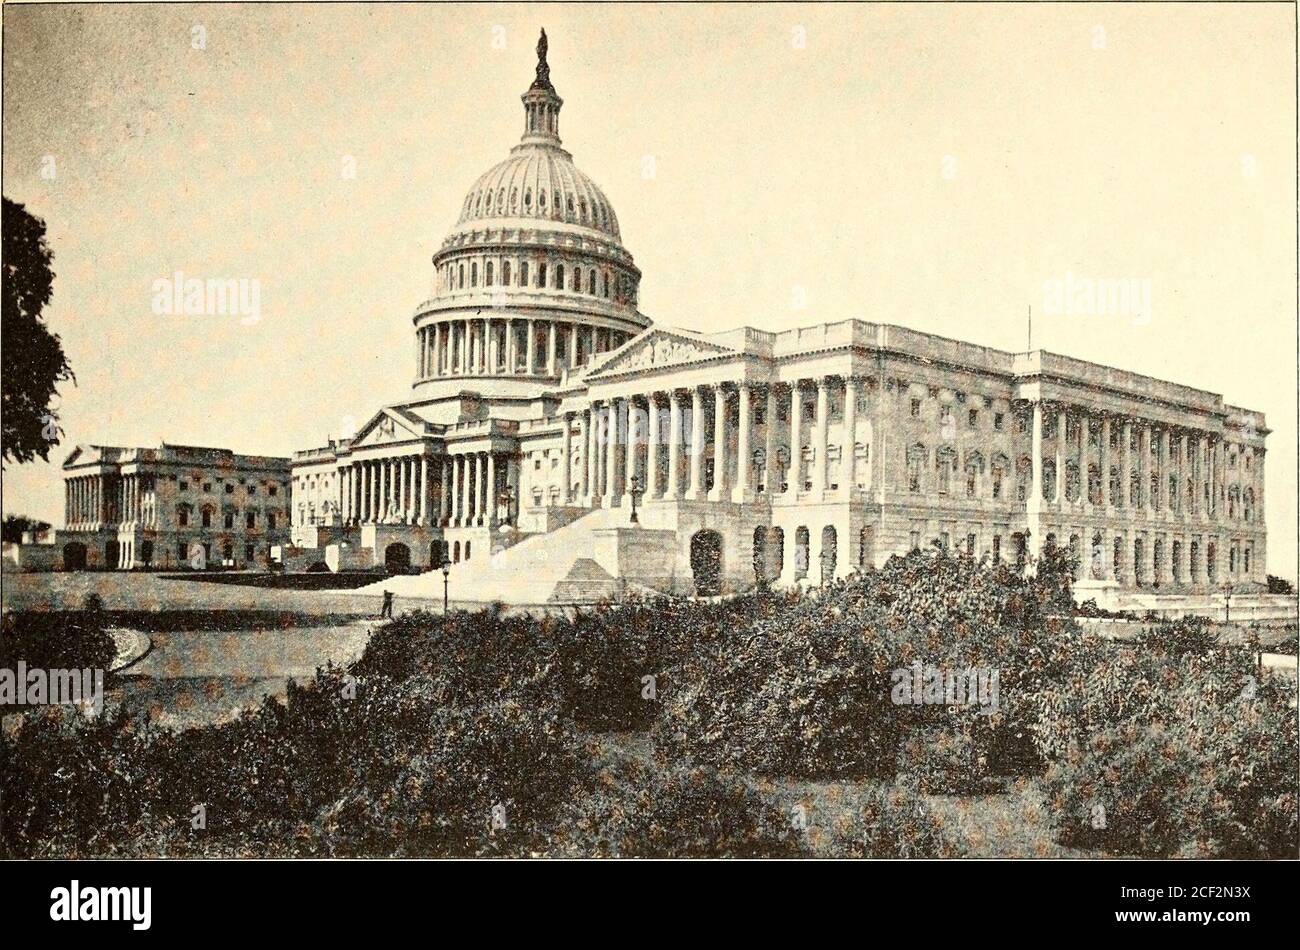 . The Lincoln autographic album : embracing likewise the favorite poetry of Abraham Lincoln. in&lt;; O o Q H t/3 From LIFE ON THE CIRCUIT WITH LINCOLN.. THE UNITED STATES CAPITOL (FRONT;. From LIFE ON THE CIRCUIT WITH LINCOLN. Stock Photo